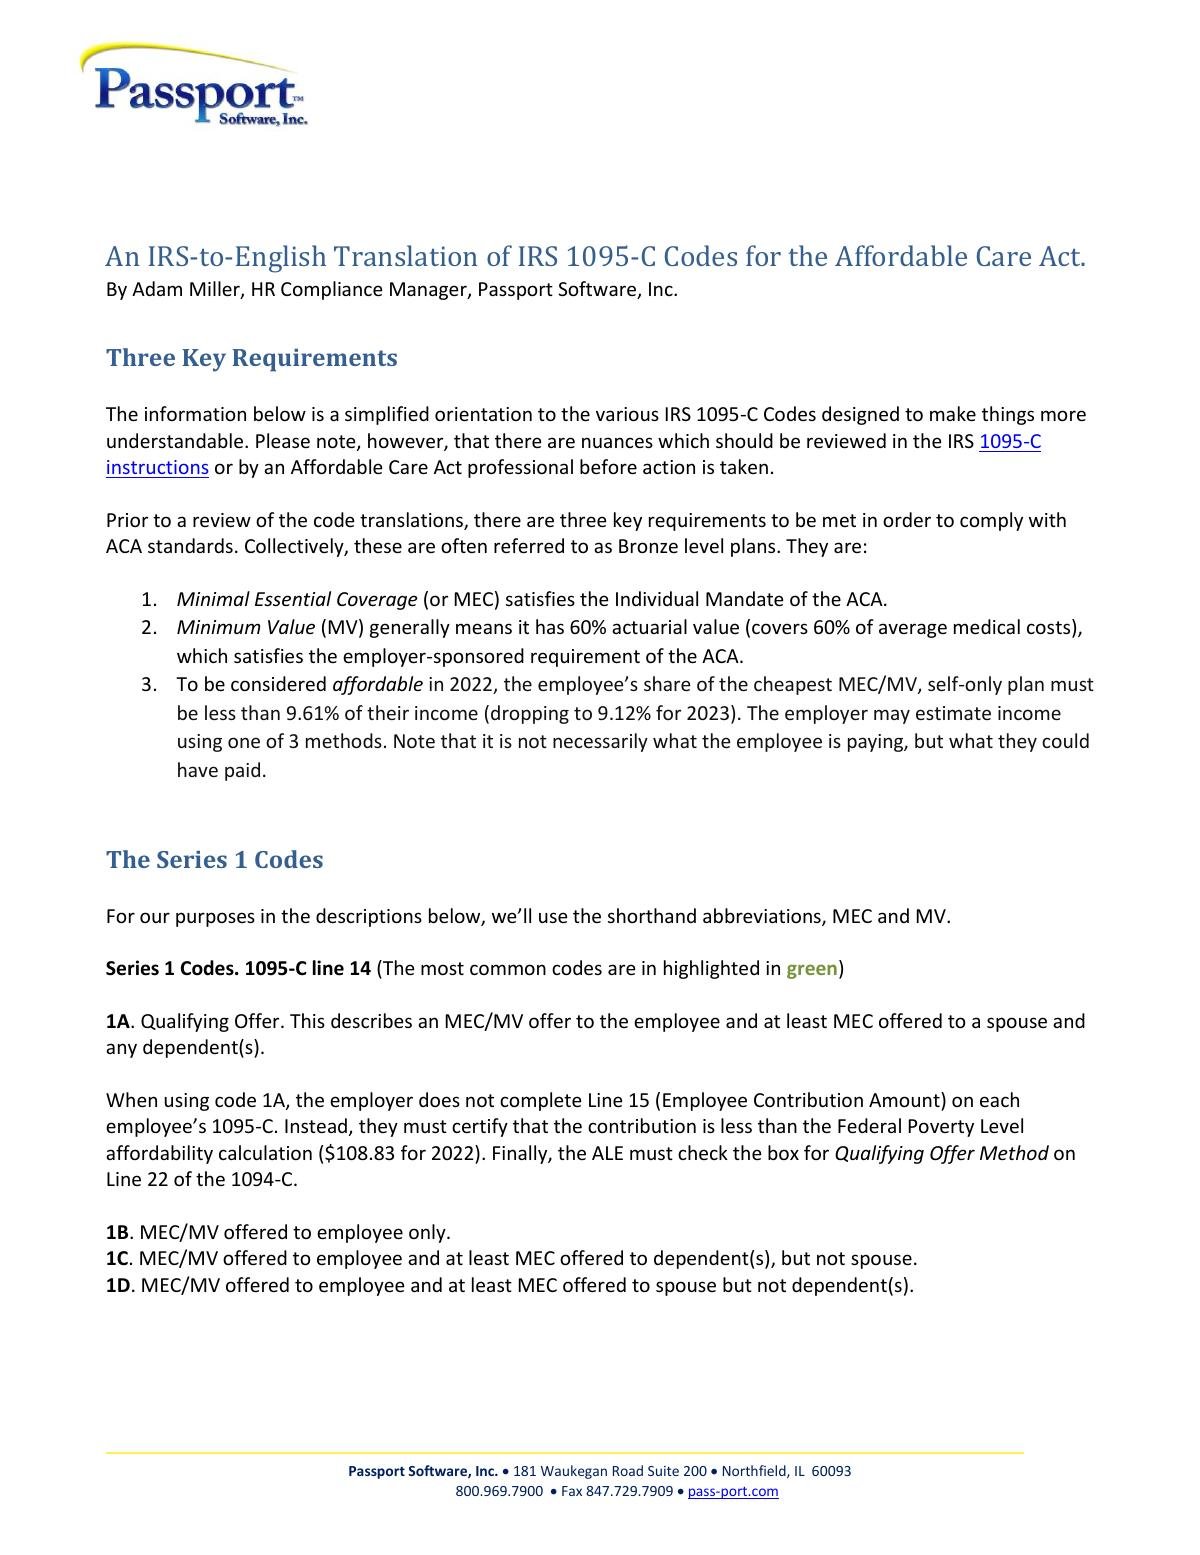 An IRS-to-English Translation of IRS 1095-C Codes for the Affordable Care Act. 